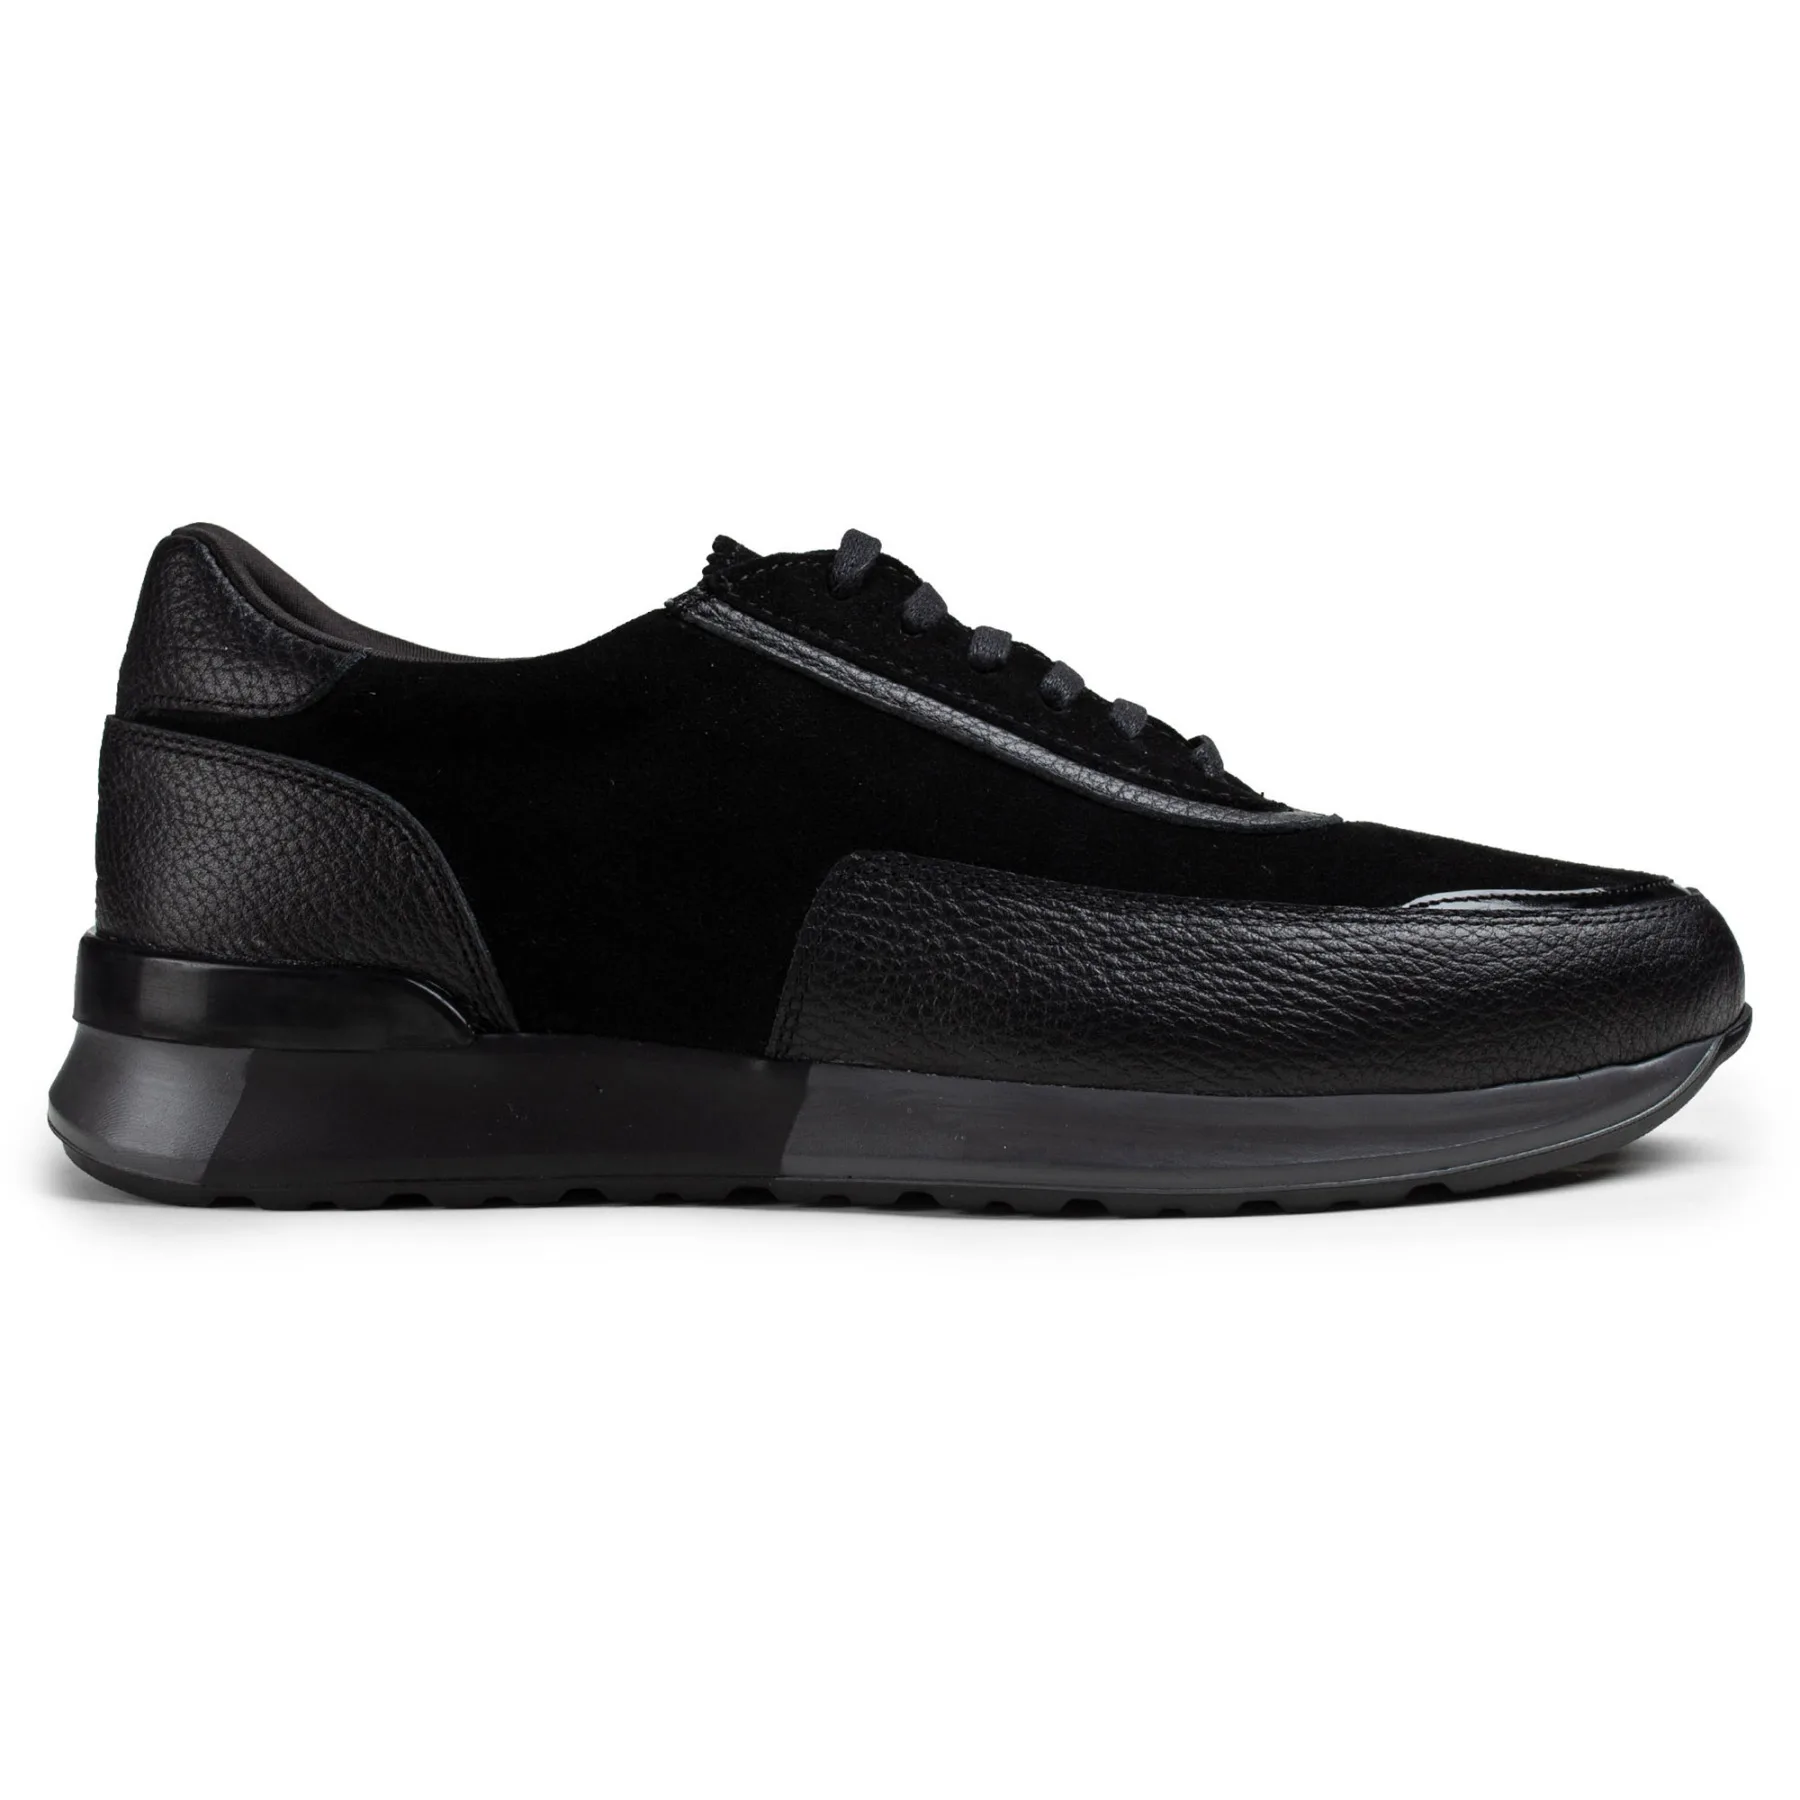 

Deery, Genuine LeatherMen 'S Black Suede Calfskin Sneakers High Quality Fashion Casual Shoes